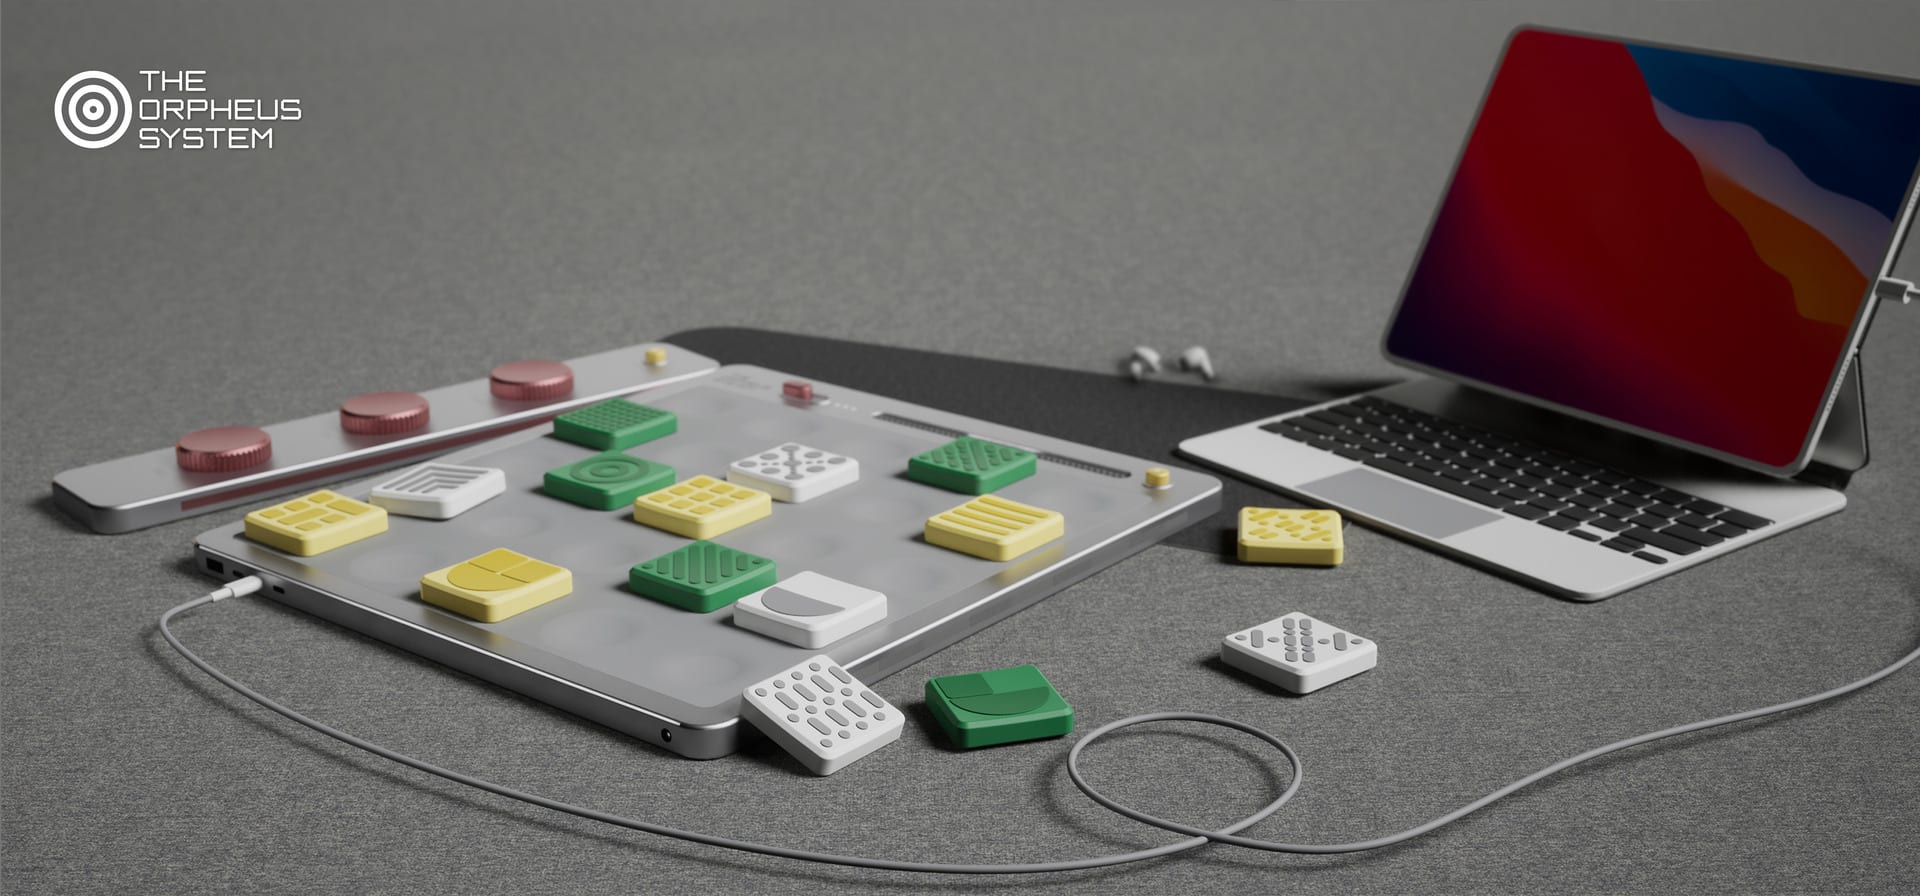 A 3D render of The Orpheus System, showing the gameboard, tiles and sound control bar, connected to a tablet and earbuds.